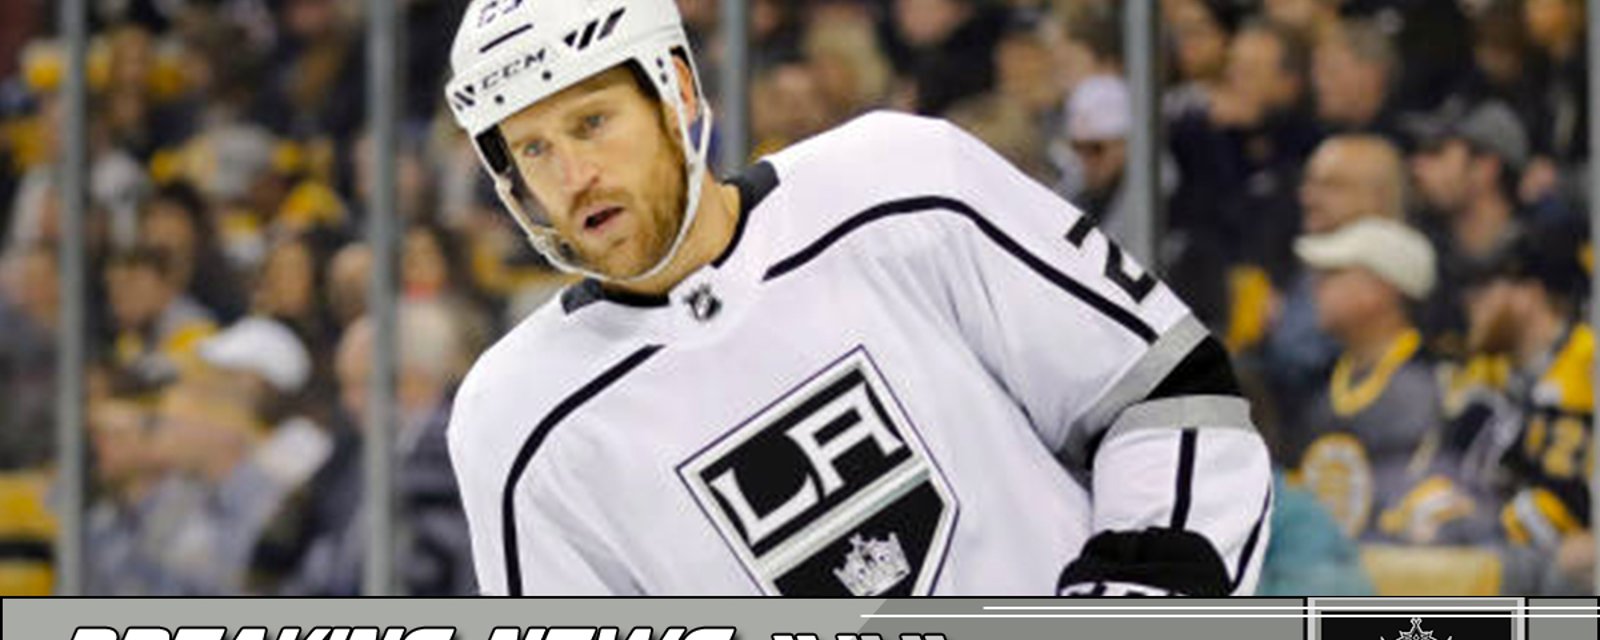 Brooks Laich days with the Kings are officially over